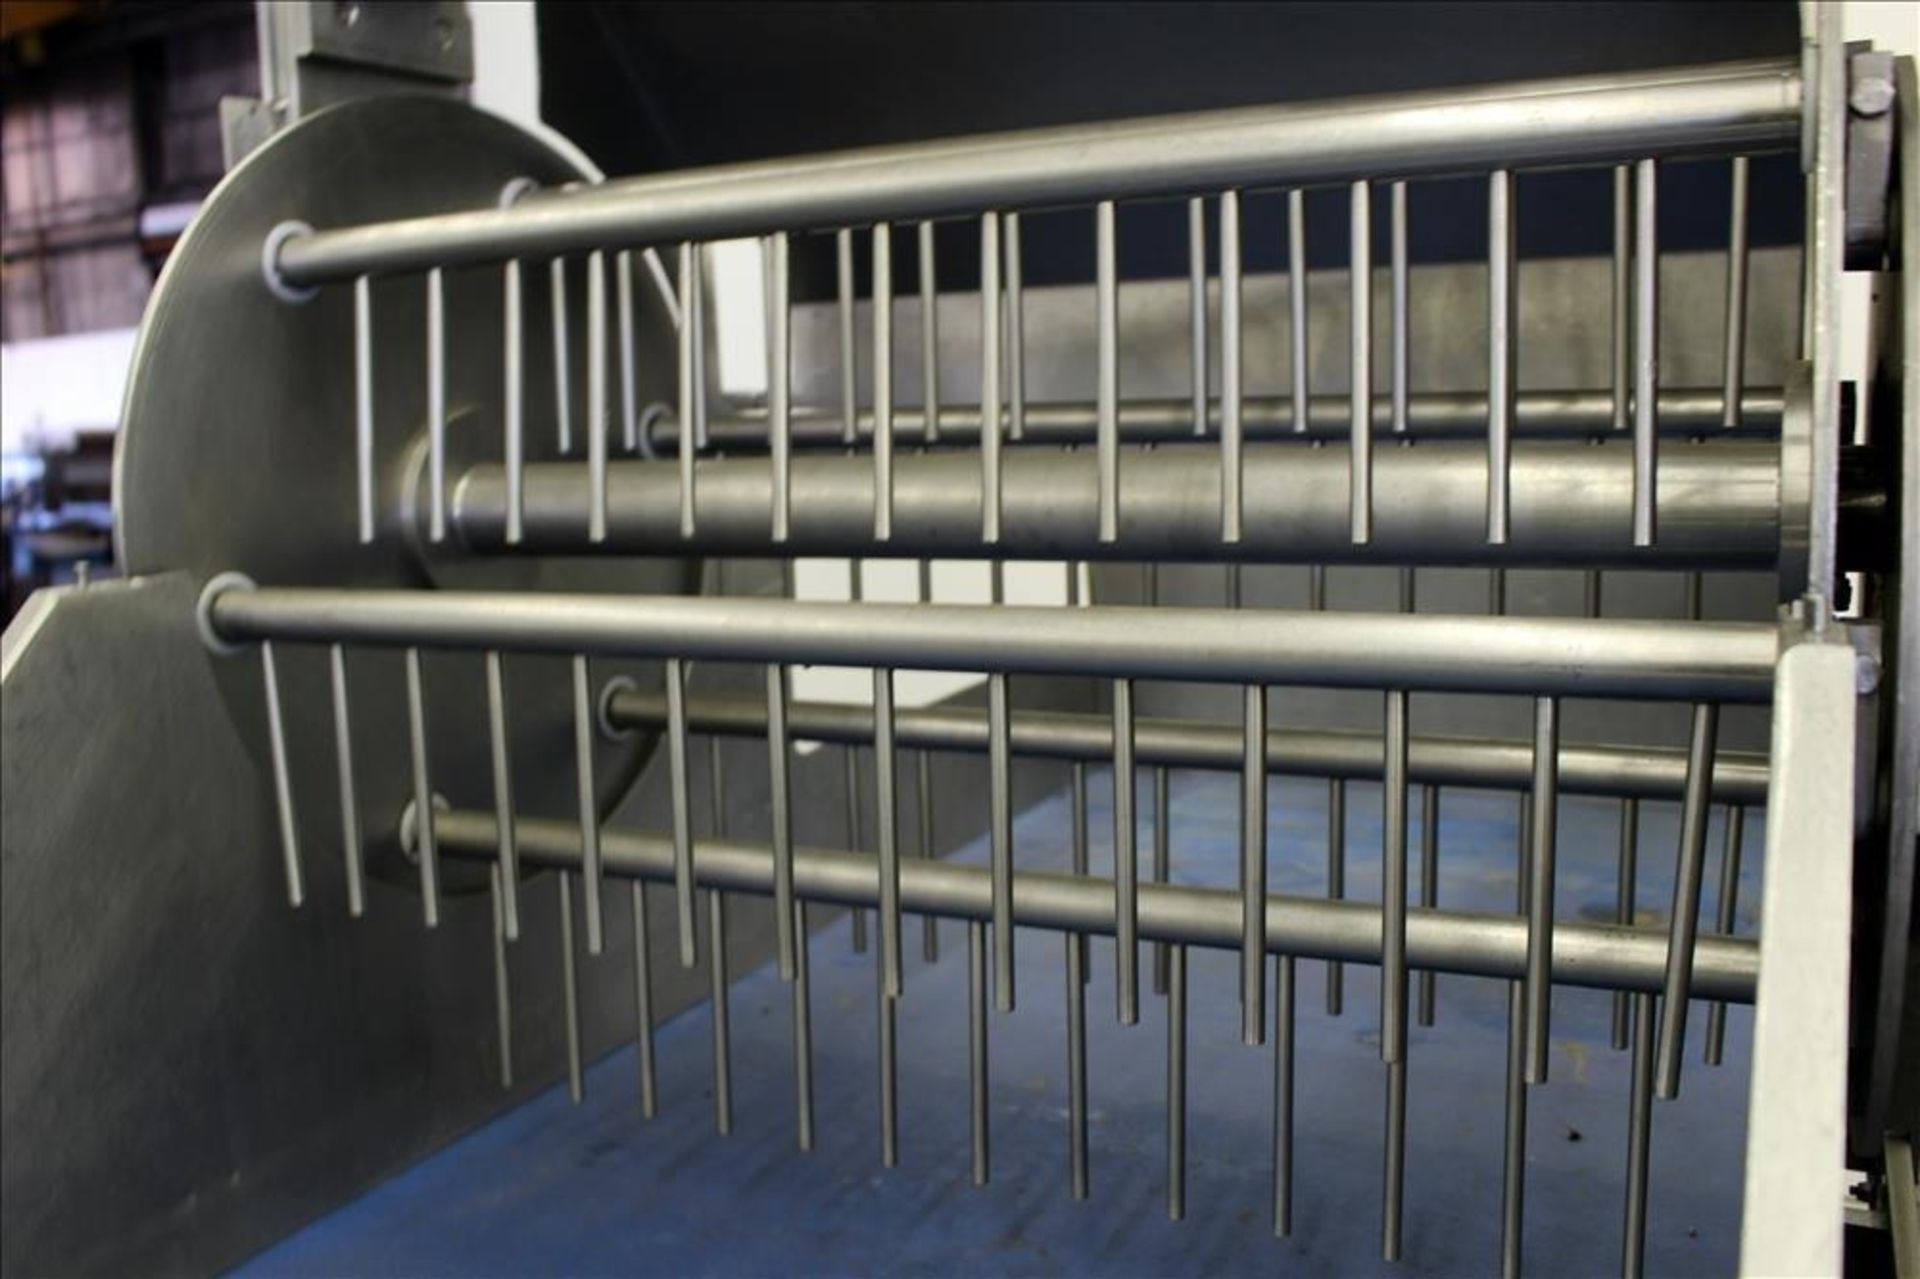 Waterfall Cheese/Applicator for Pizza, 304 Stainless Steel. Has 28" wide x 60" long belt conveyor - Image 5 of 46